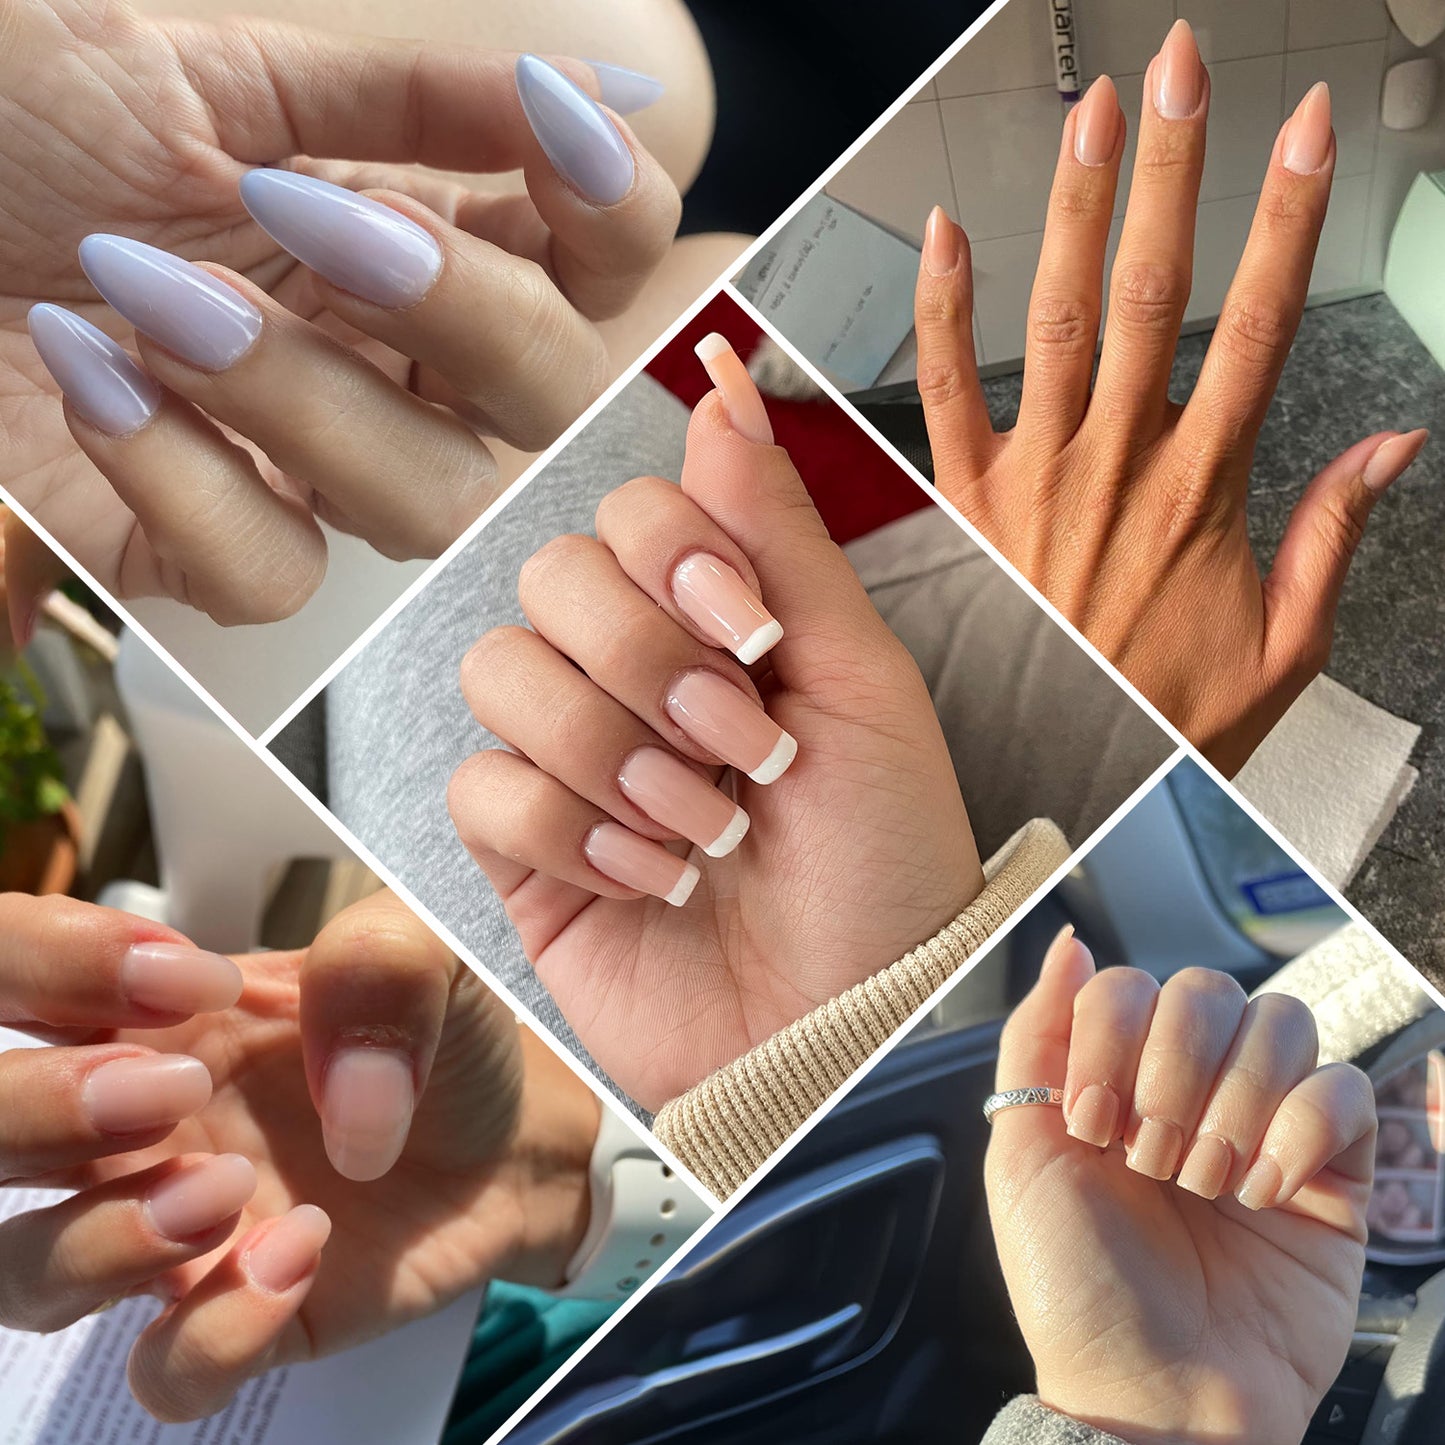 A collage of photos showing people's nails after using Paddie's Nail Polygel. The nails look shiny and polished.